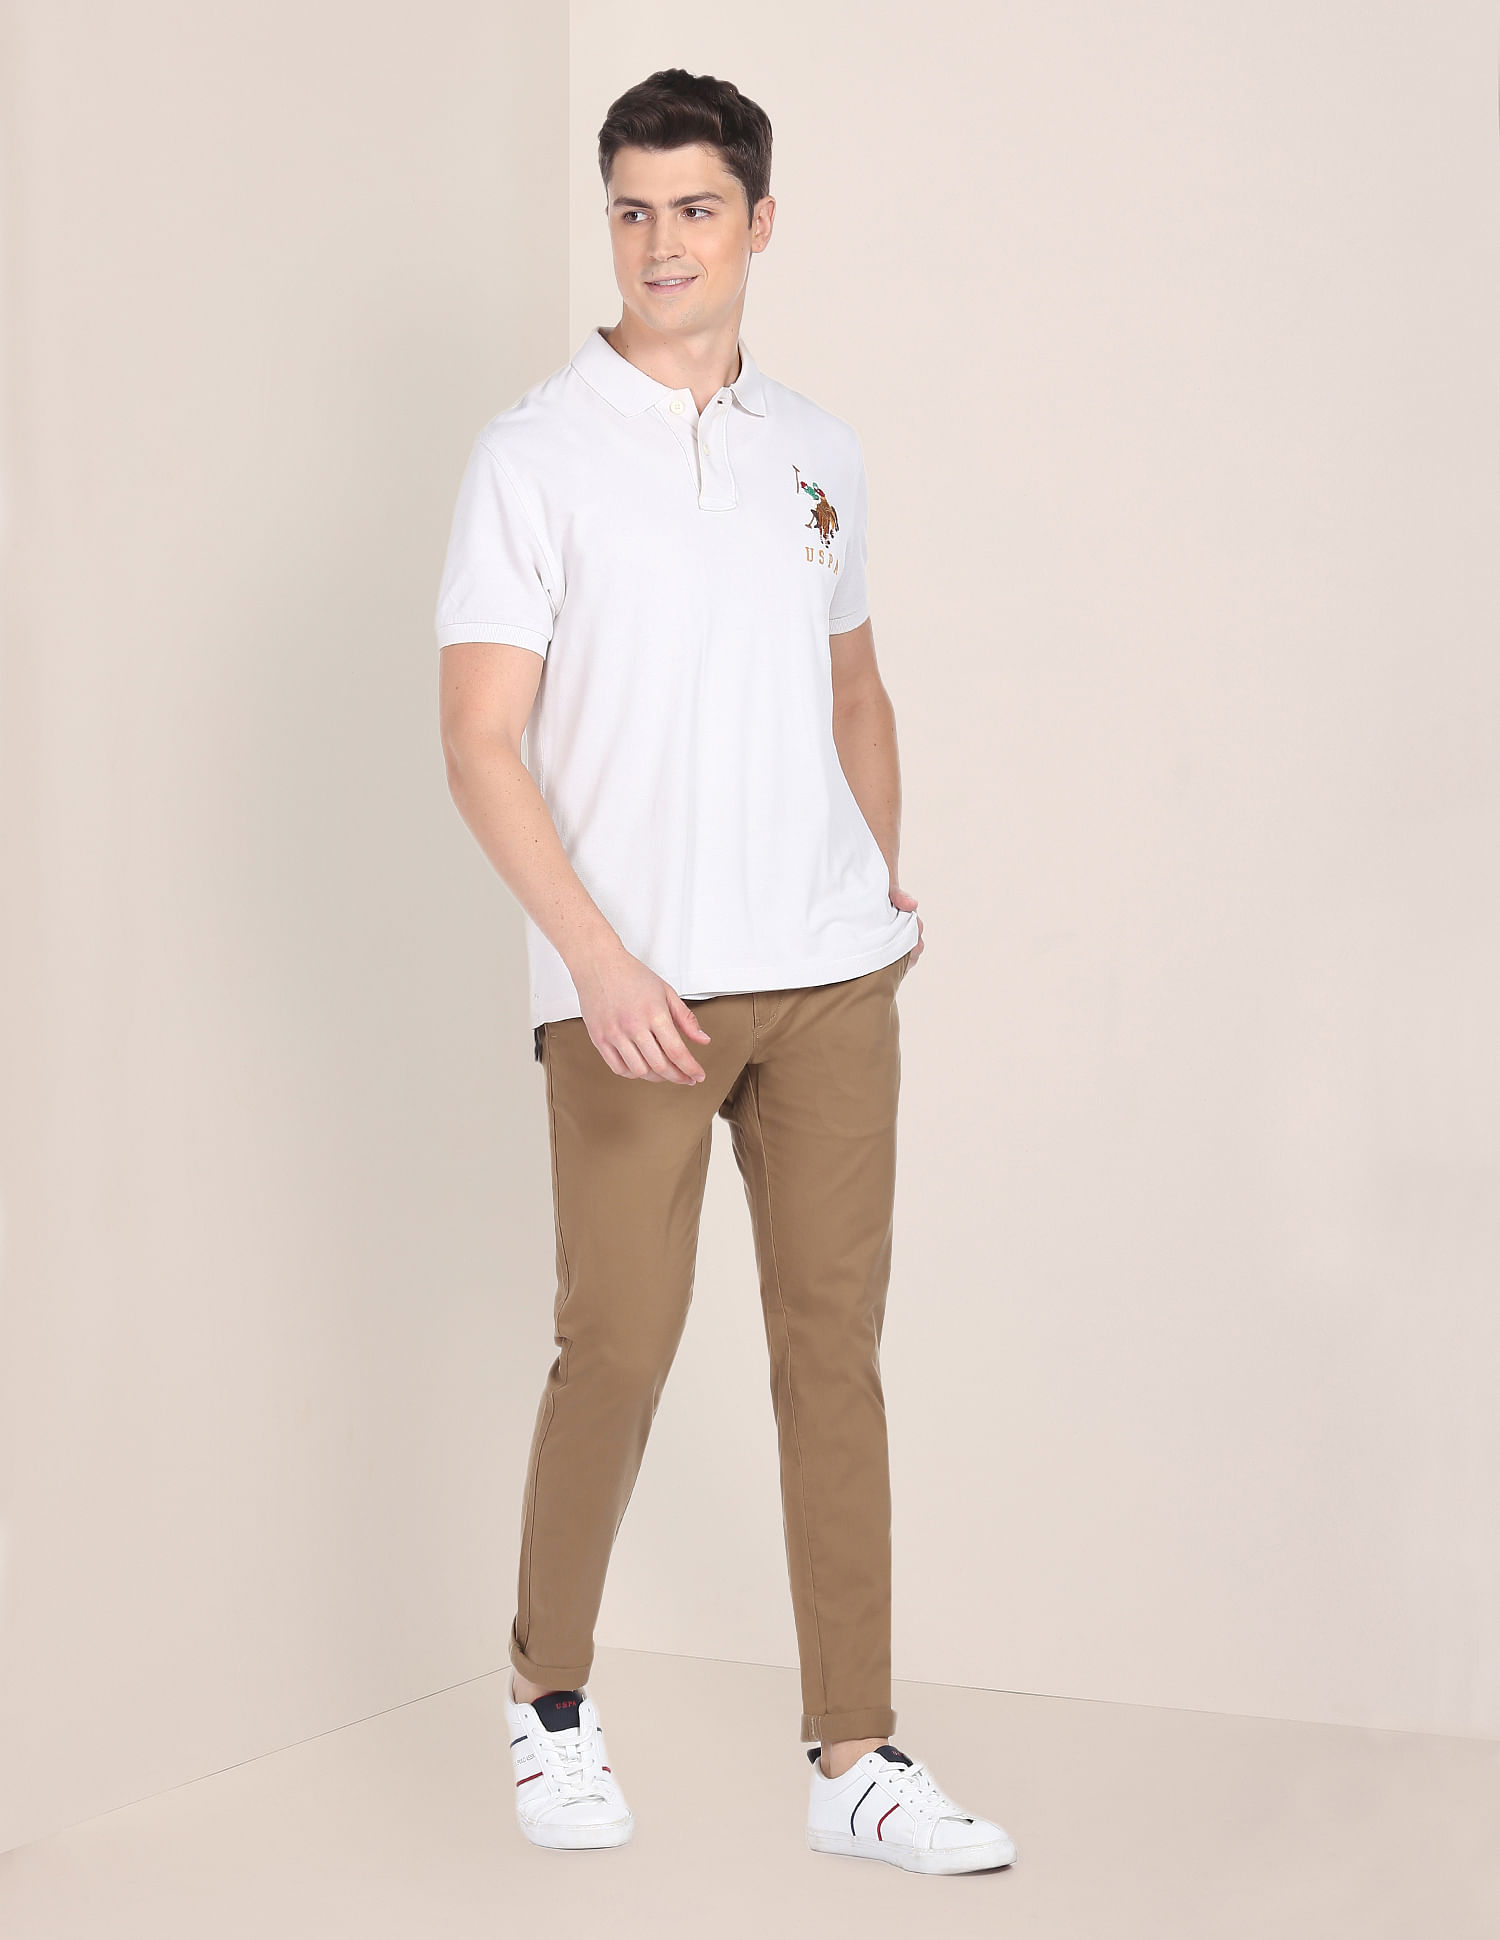 Thoughts on the polo shirt with smart trousers combo? : r/OUTFITS